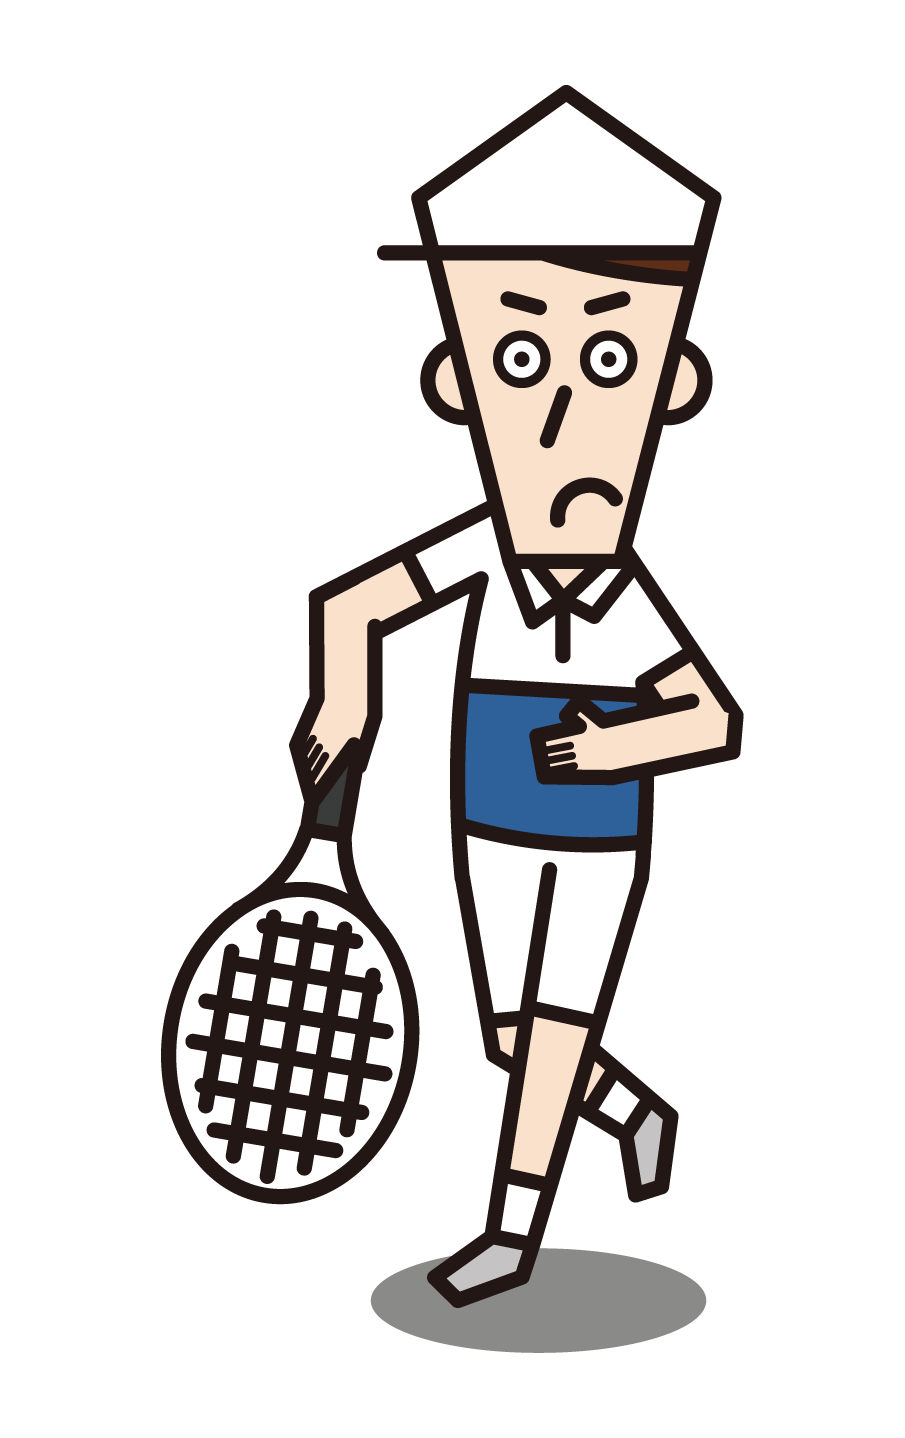 Illustration of a tennis player (male) who hits a serve